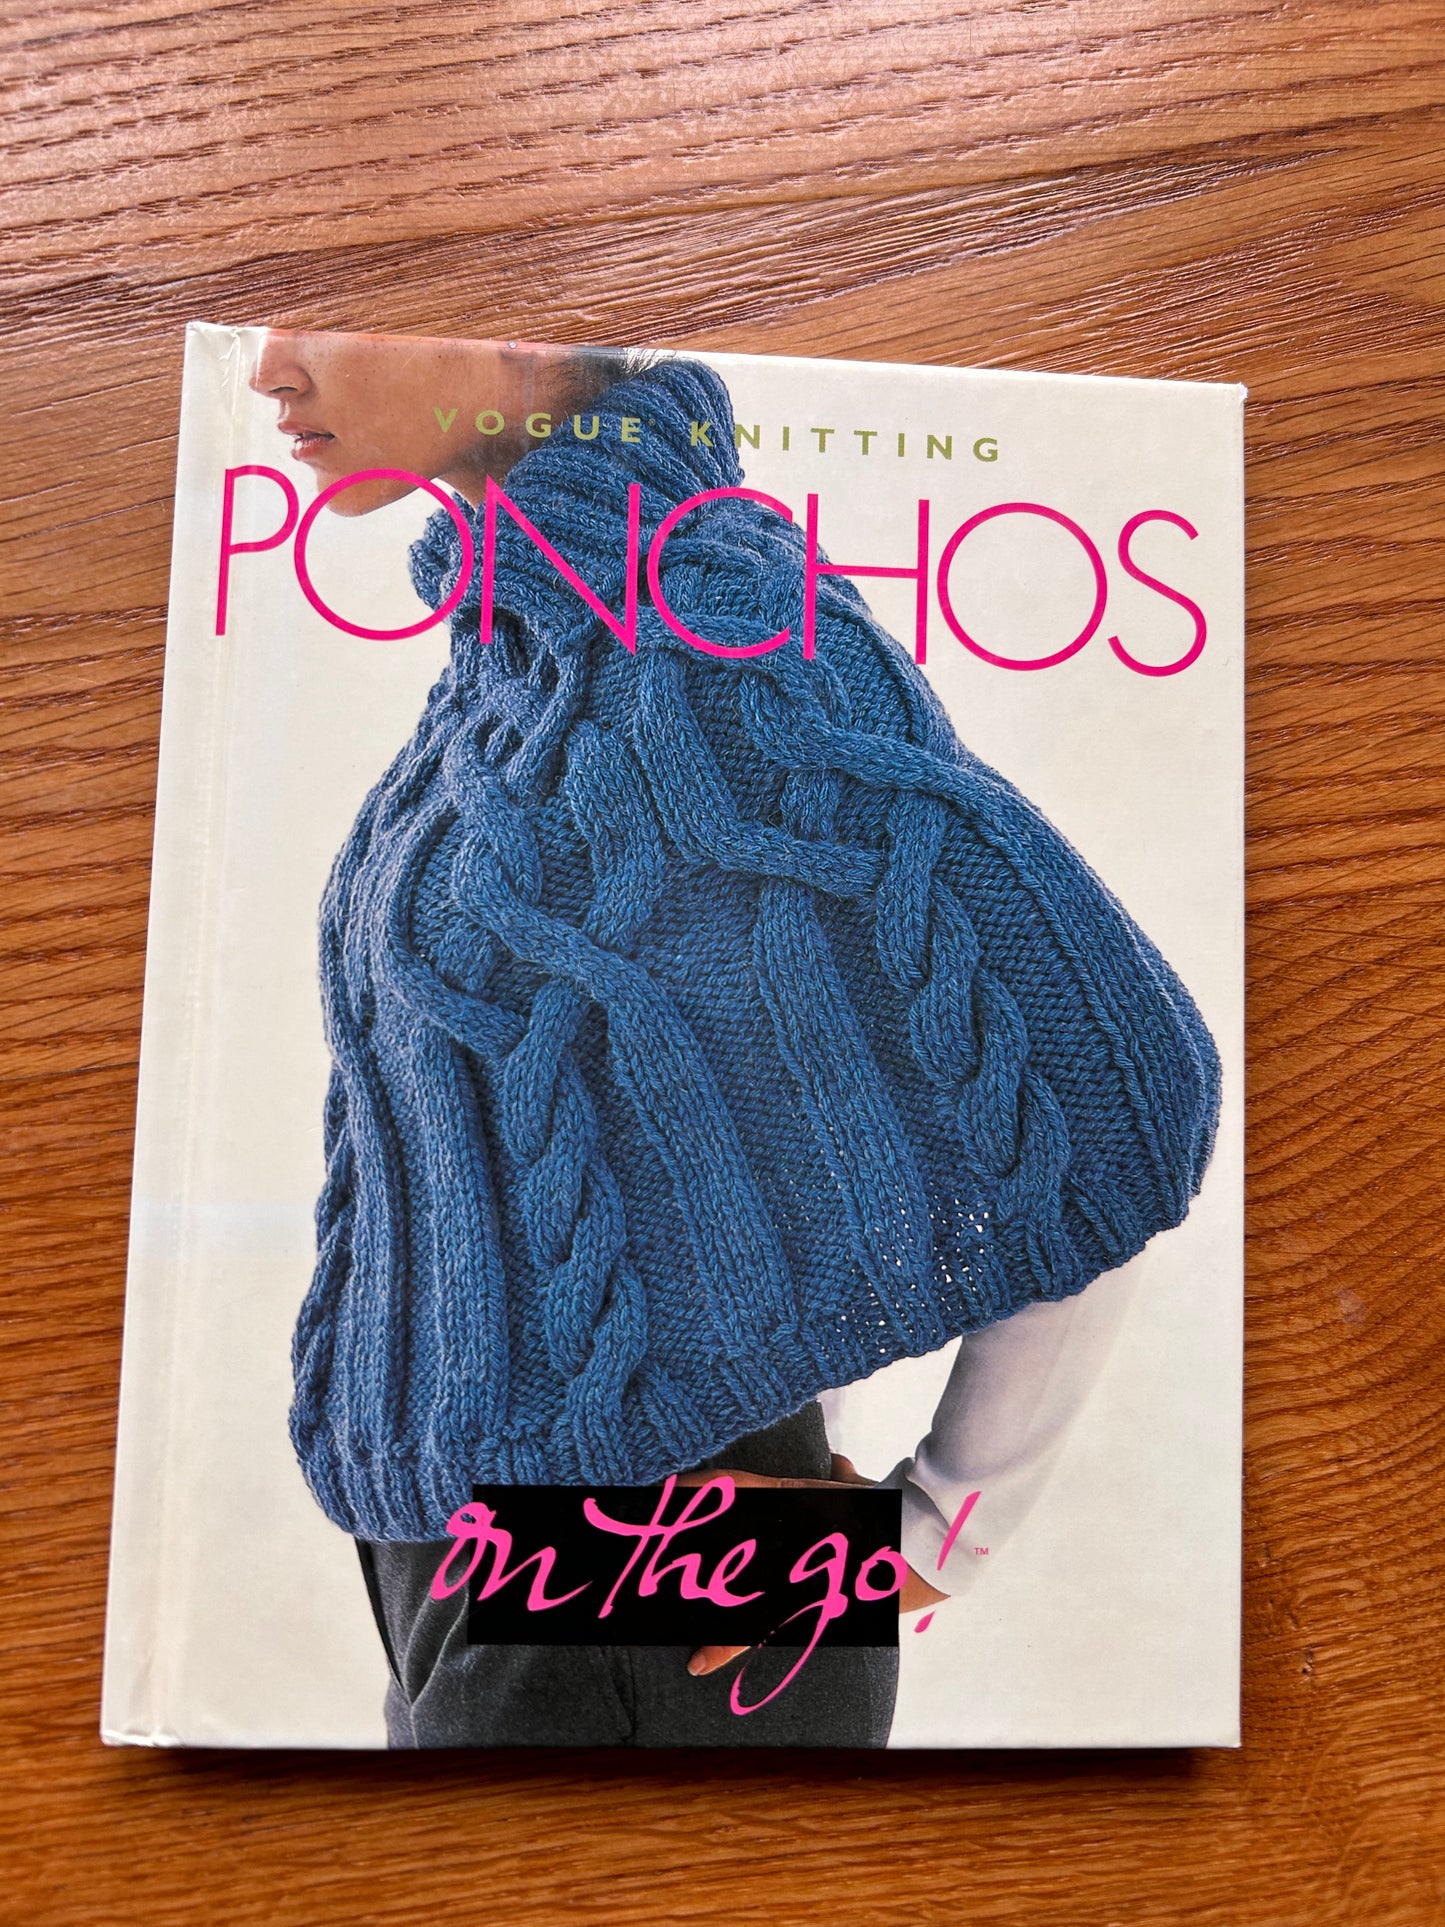 Vogue Knitting Ponchos On The Go!